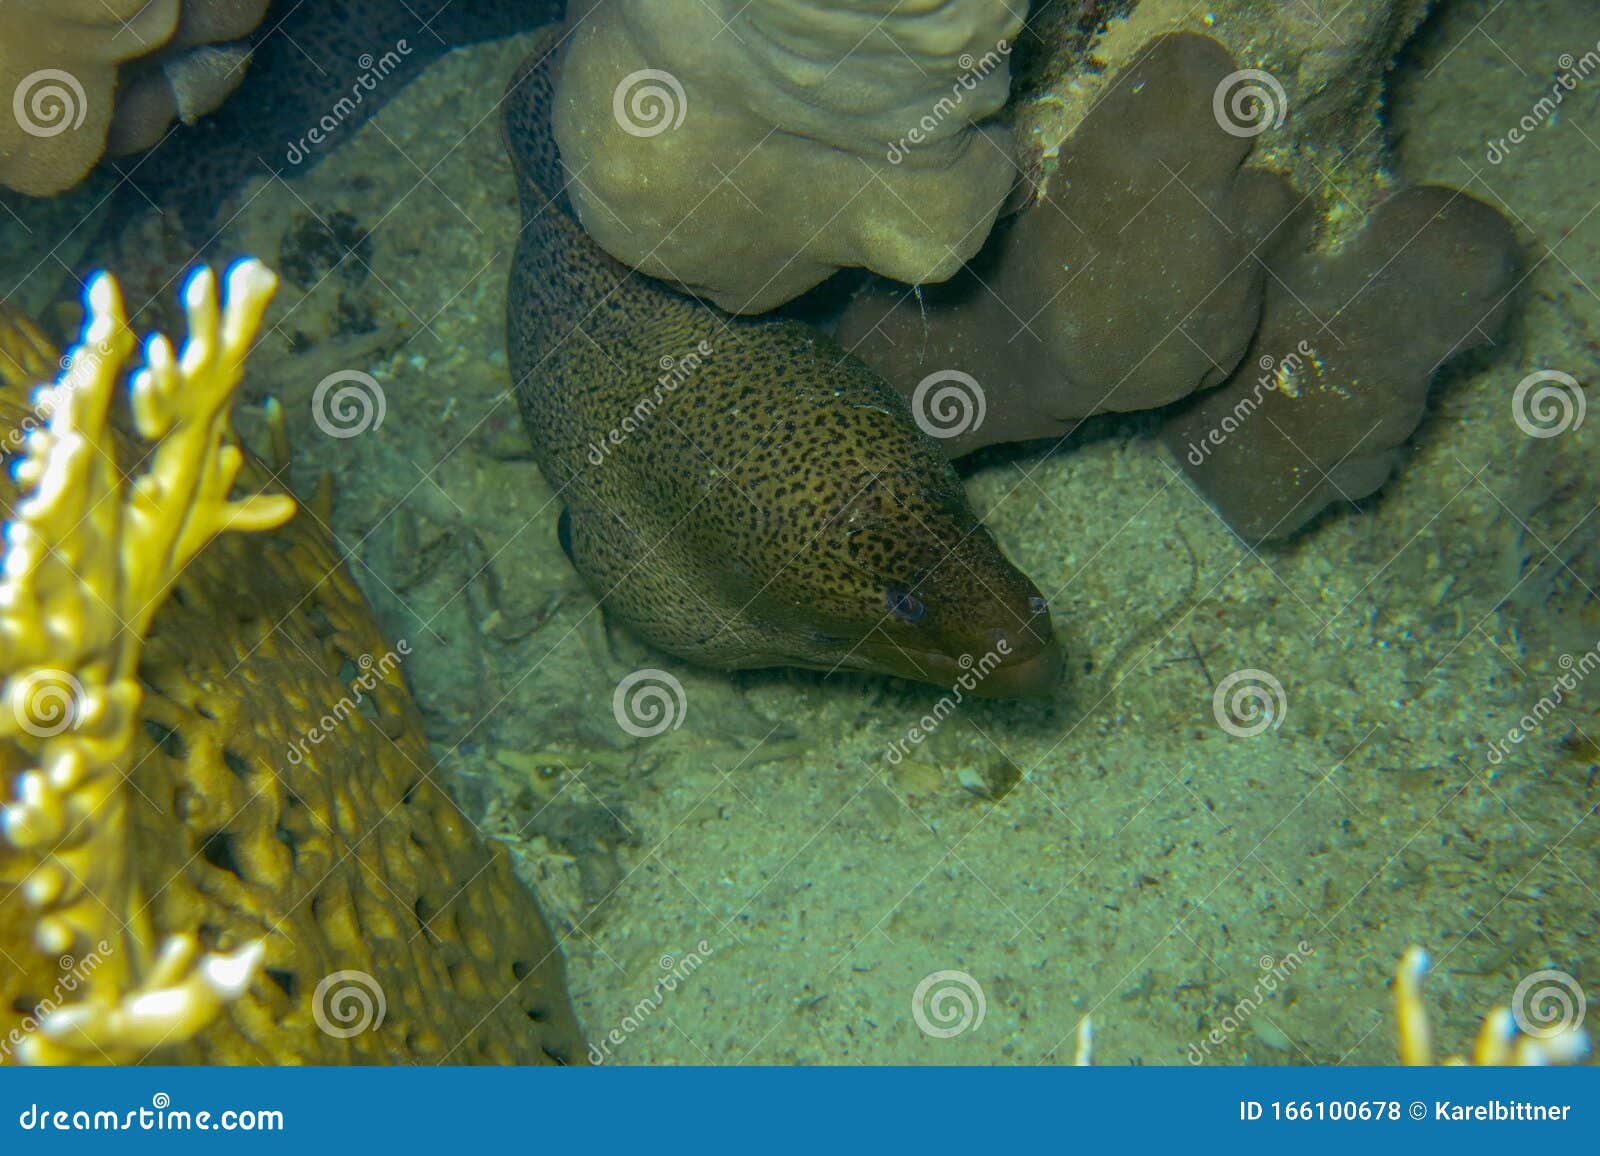 big specimen of giant moray is hidden under a coral reef. this beautiful moray eel is a species of marine fish in the muraenidae.